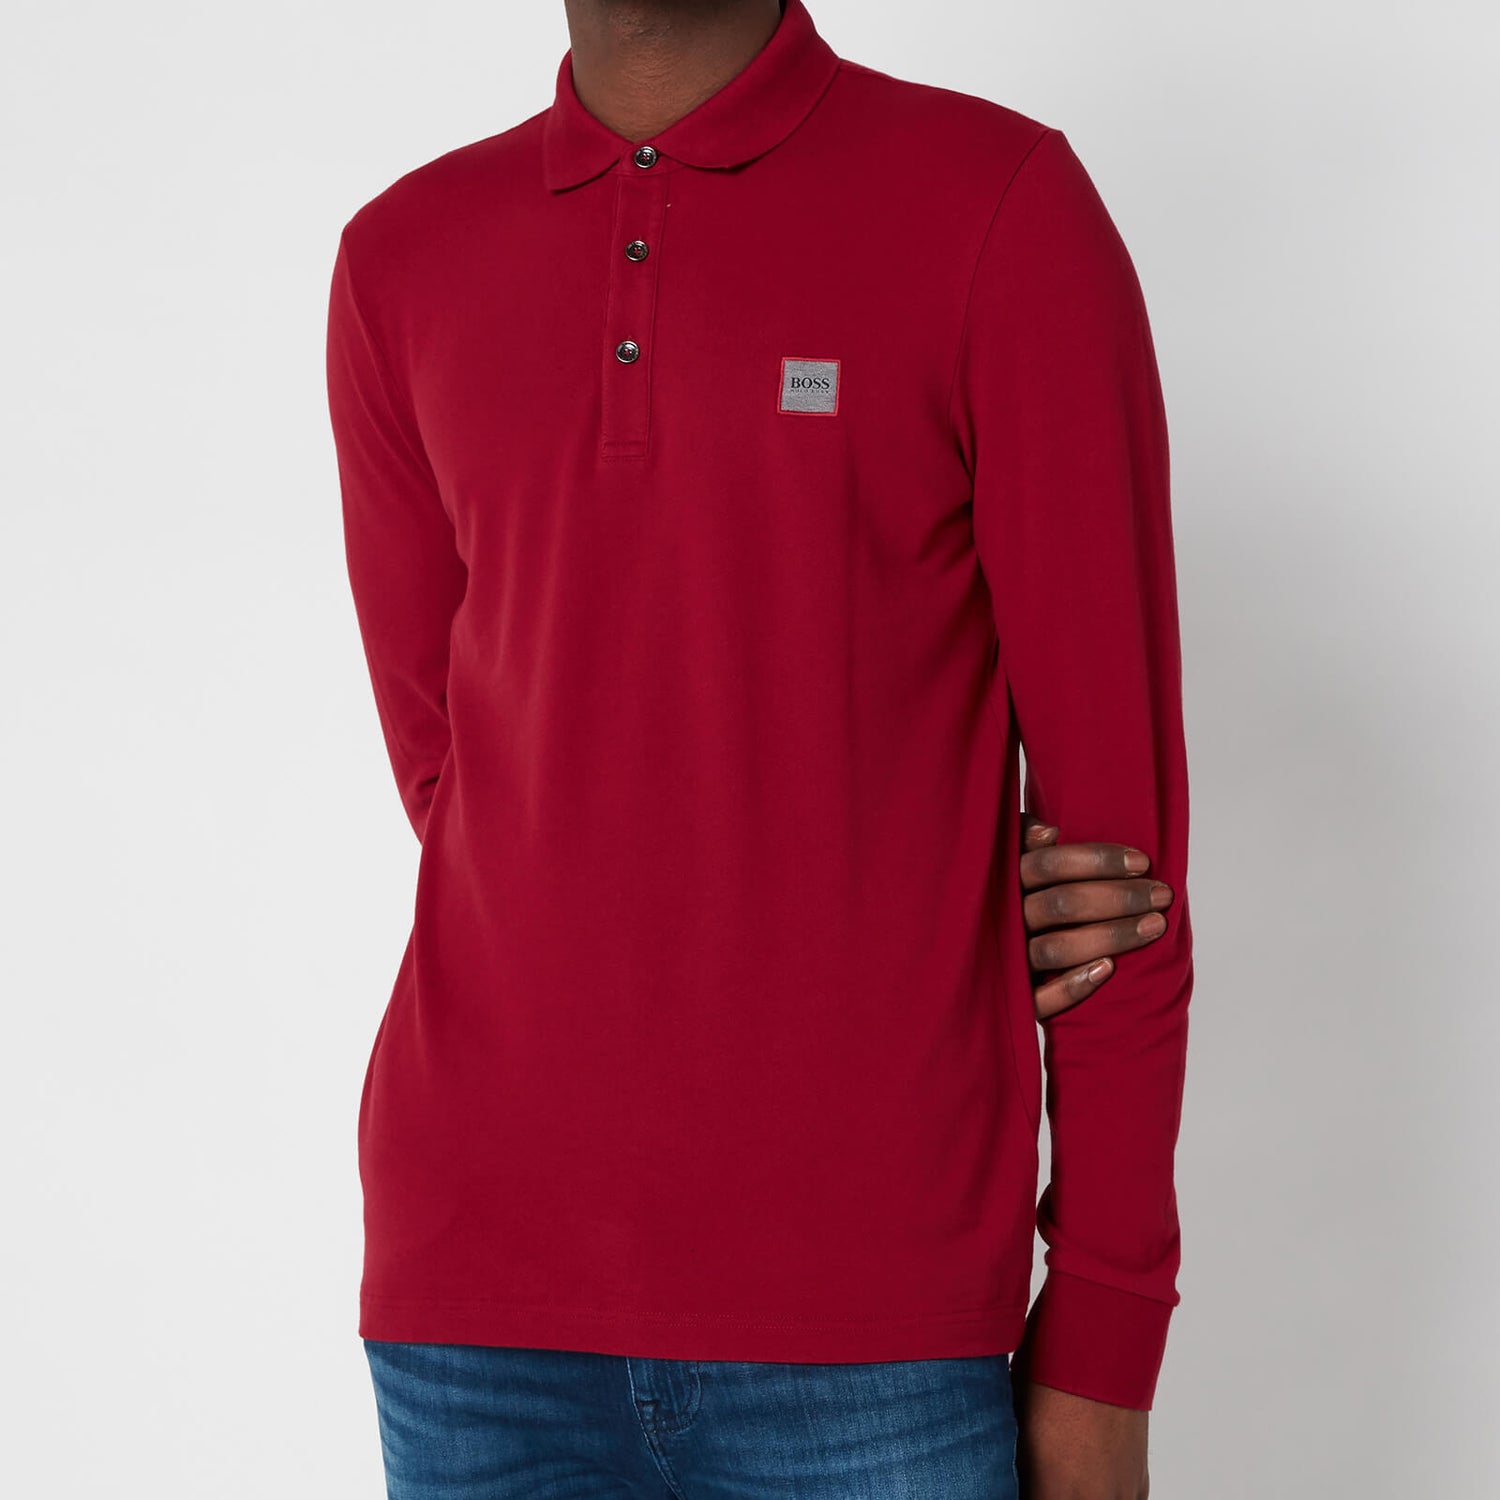 BOSS Casual Men's Passerby Long Sleeve Polo Shirt - Dark Red